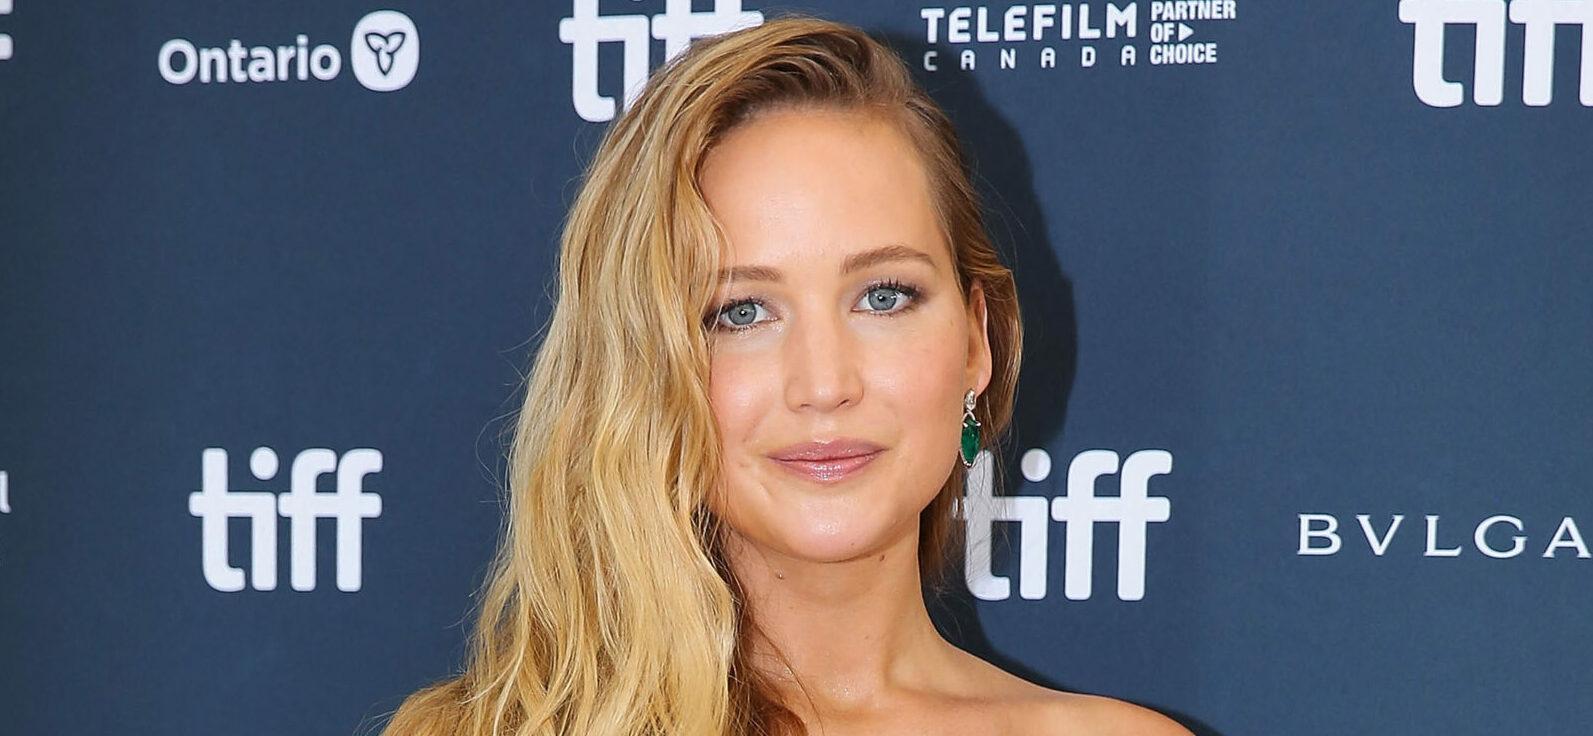 Jennifer Lawrence Bashed Online For Claiming To Be The First Female Action Lead